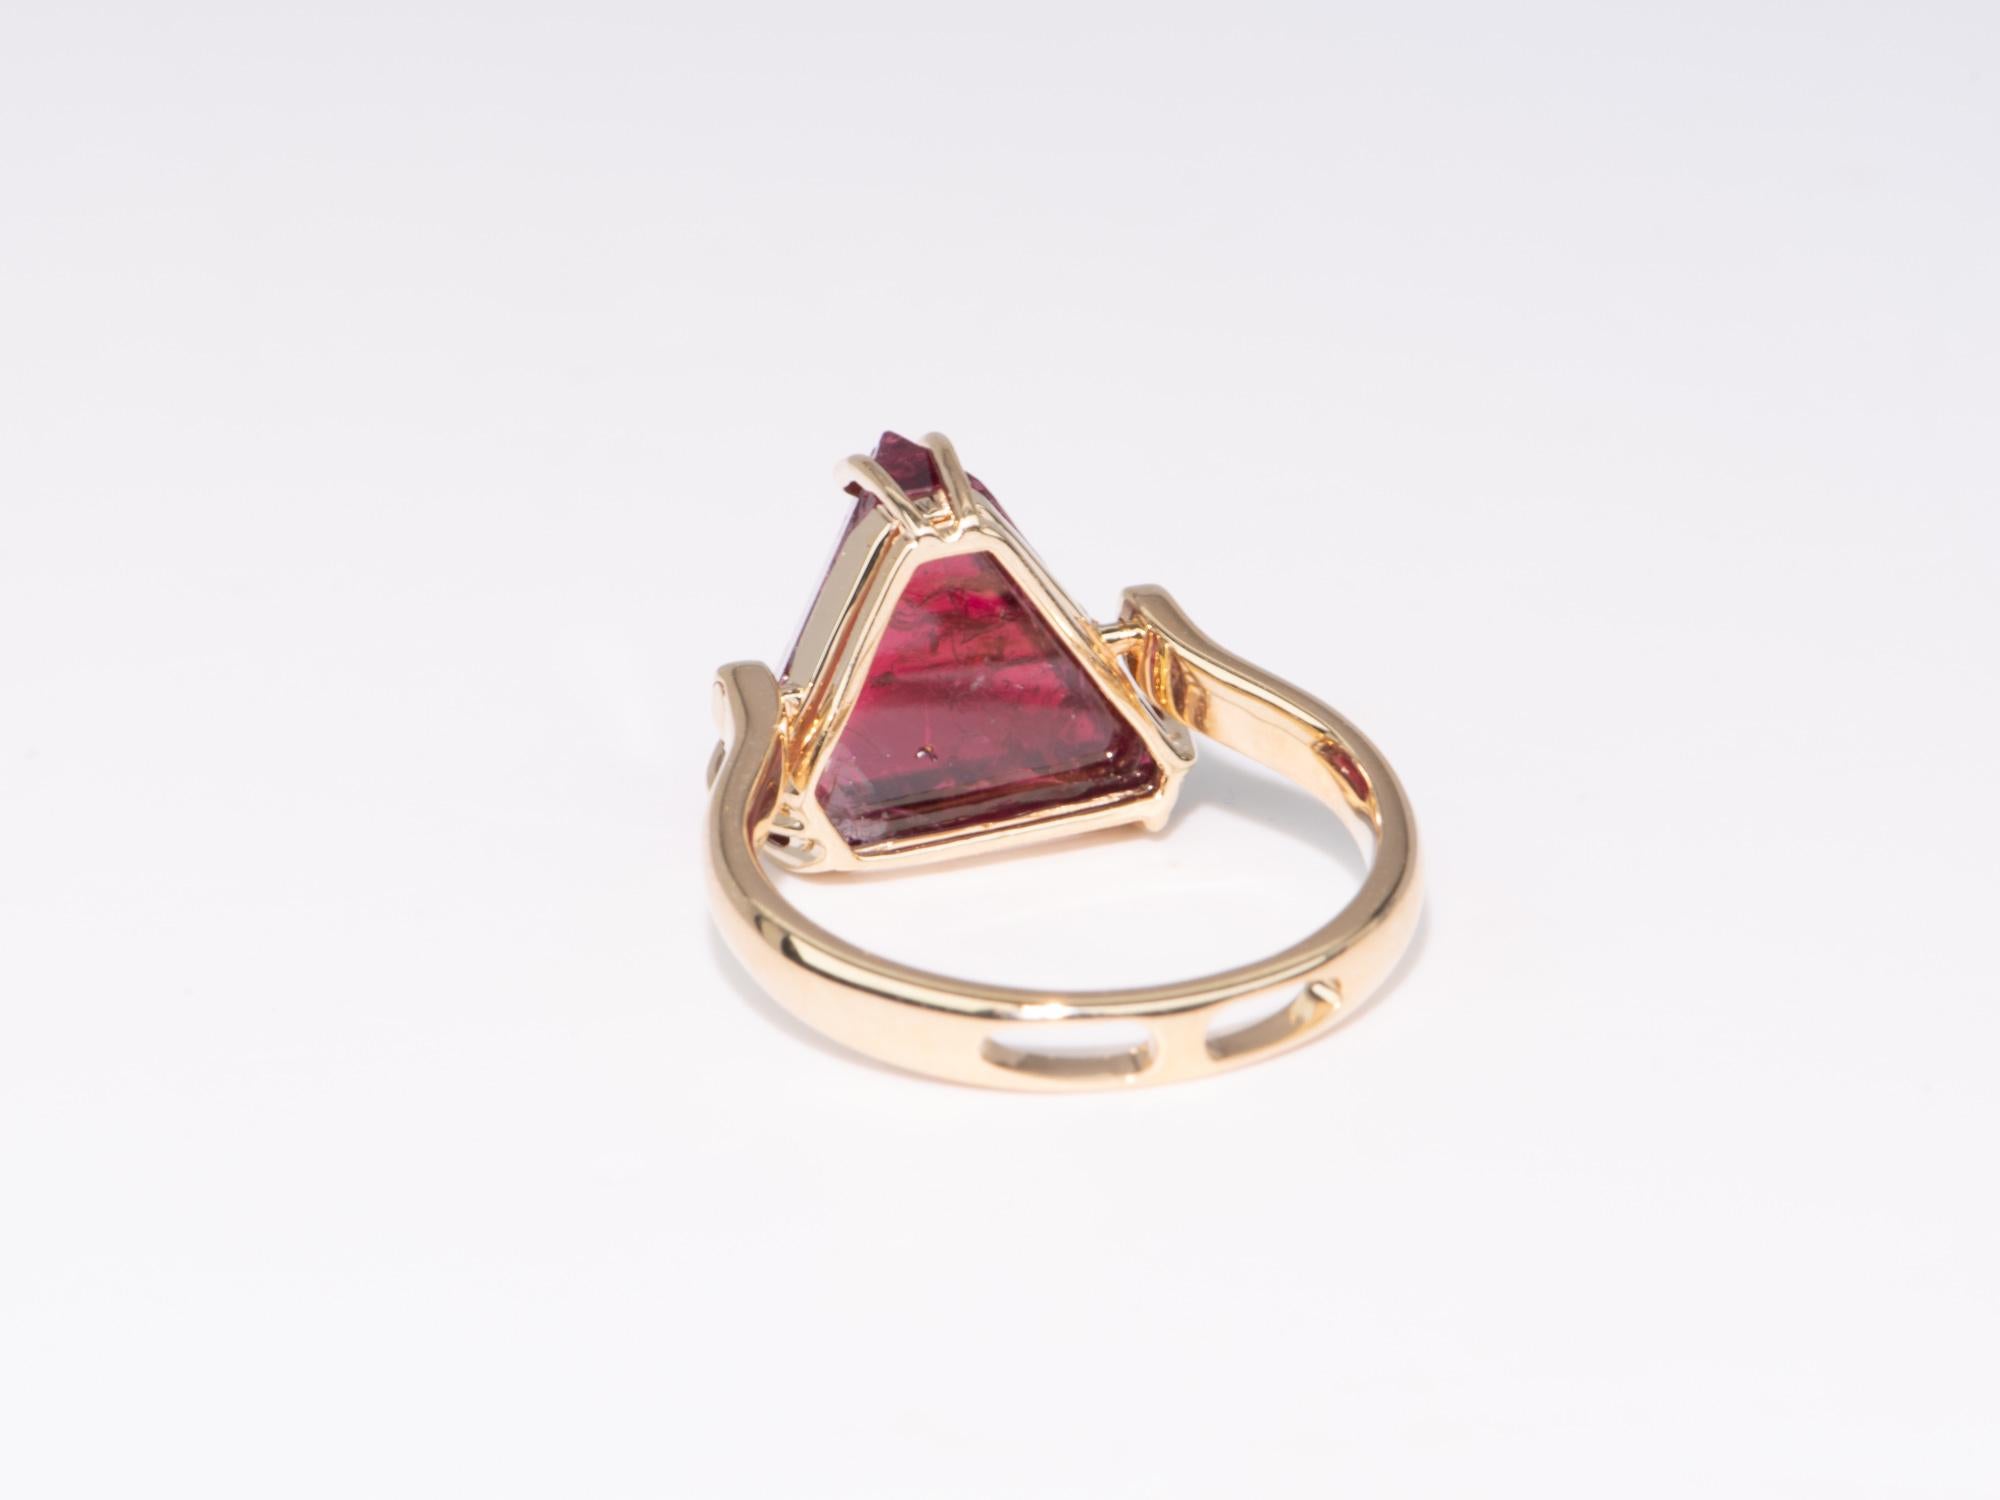 Uncut 6.21ct Myanmar Red Spinel Octahedral Crystal Ring Convert to Pendant 14K Gold For Sale